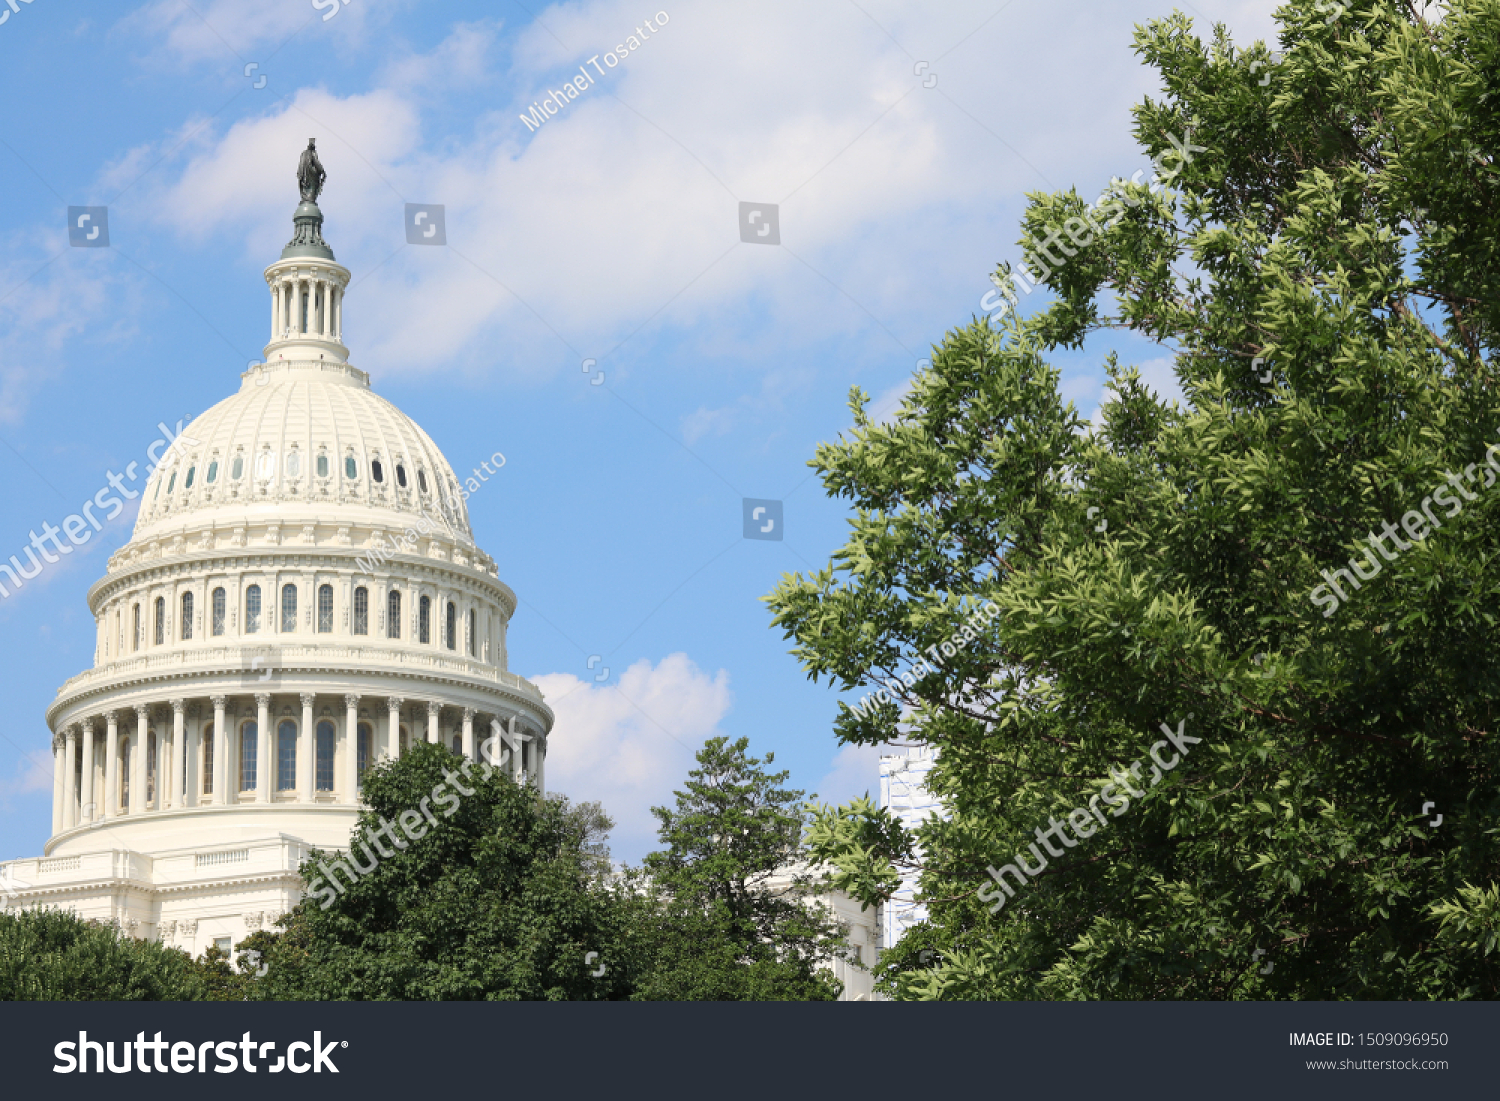 The Dome of the US Capital  #1509096950